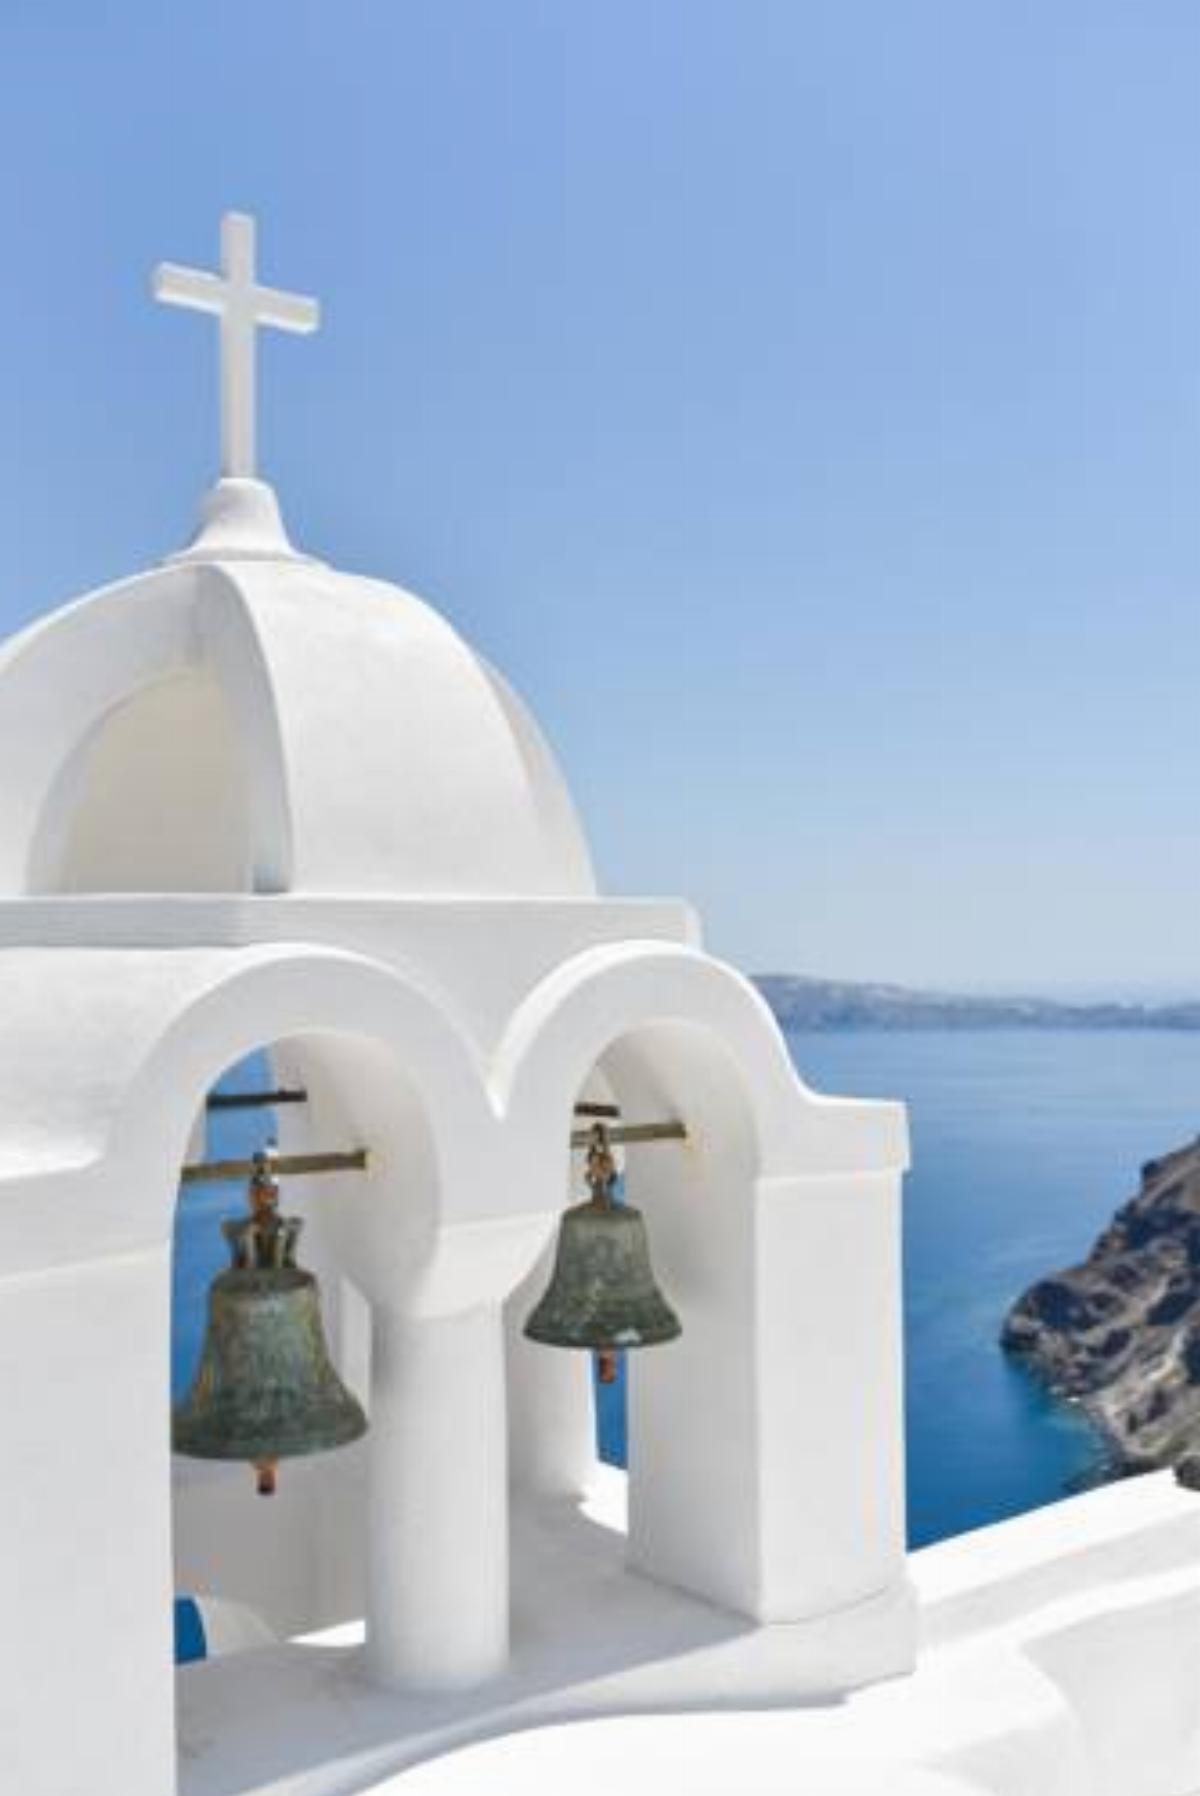 Aroma Suites Hotel Fira Greece